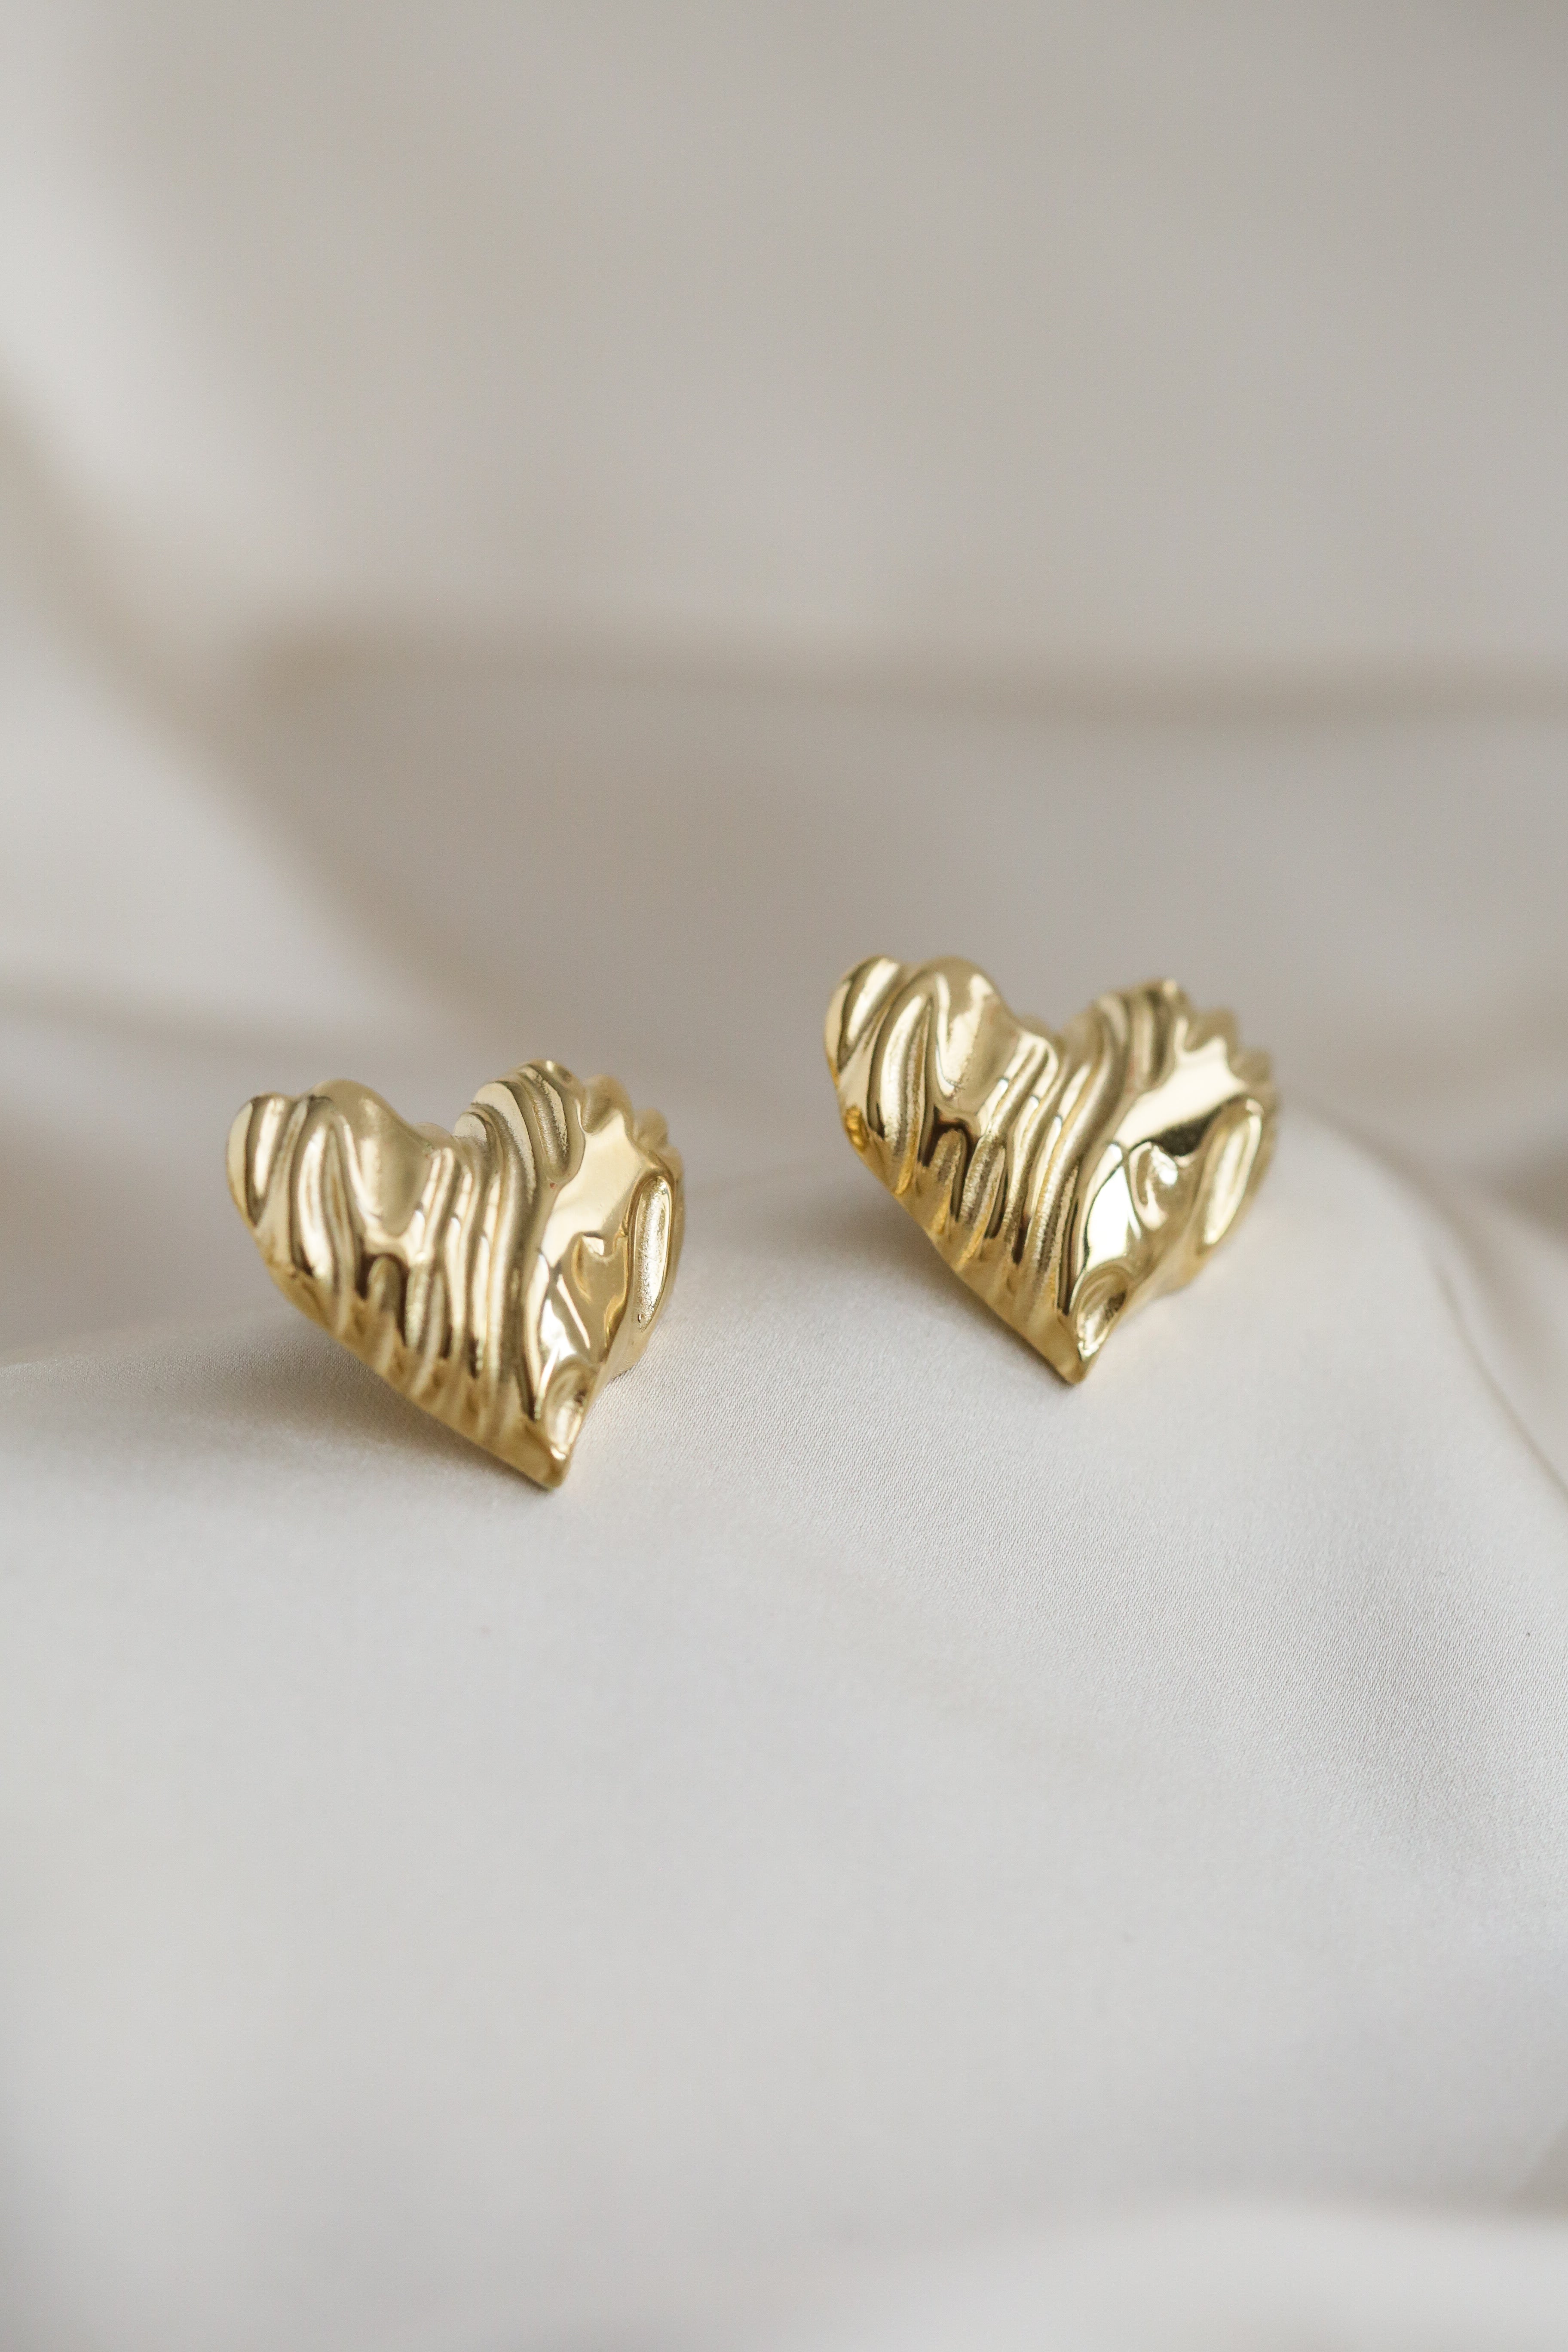 The Heart - Statement Earrings - Boutique Minimaliste has waterproof, durable, elegant and vintage inspired jewelry